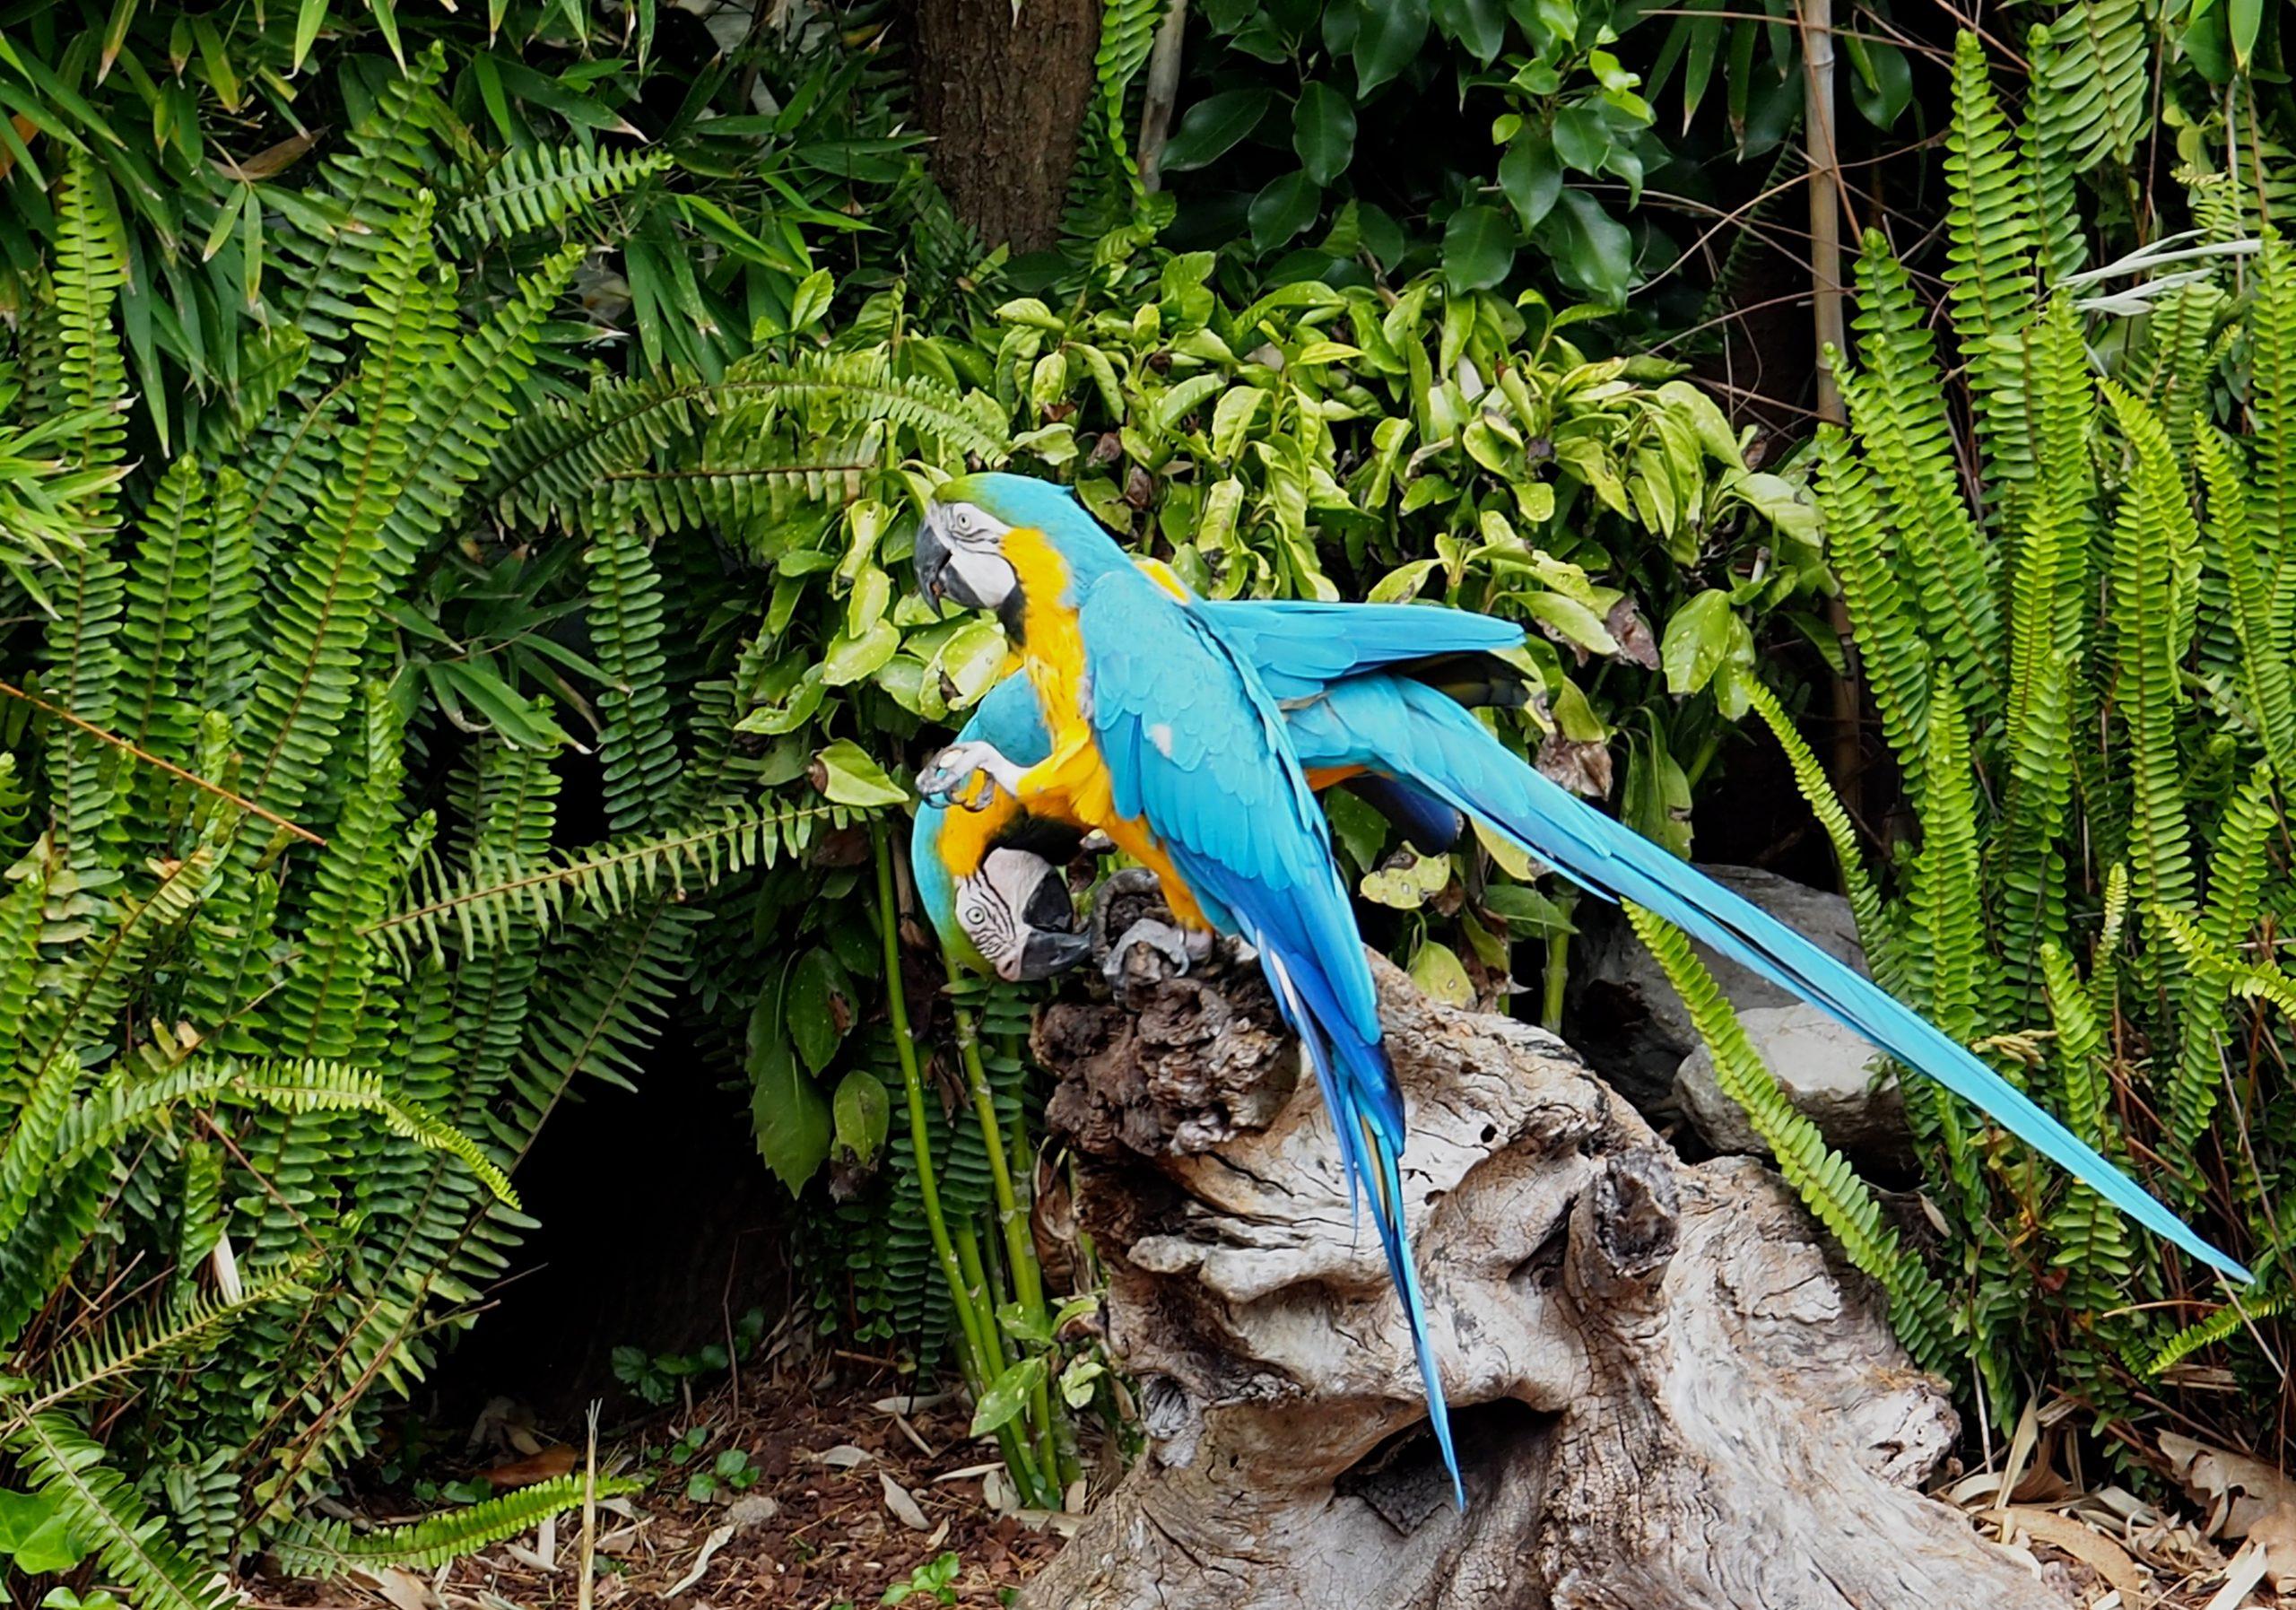 Blue and yellow macaws or Psittacidae species surrounded by ferns